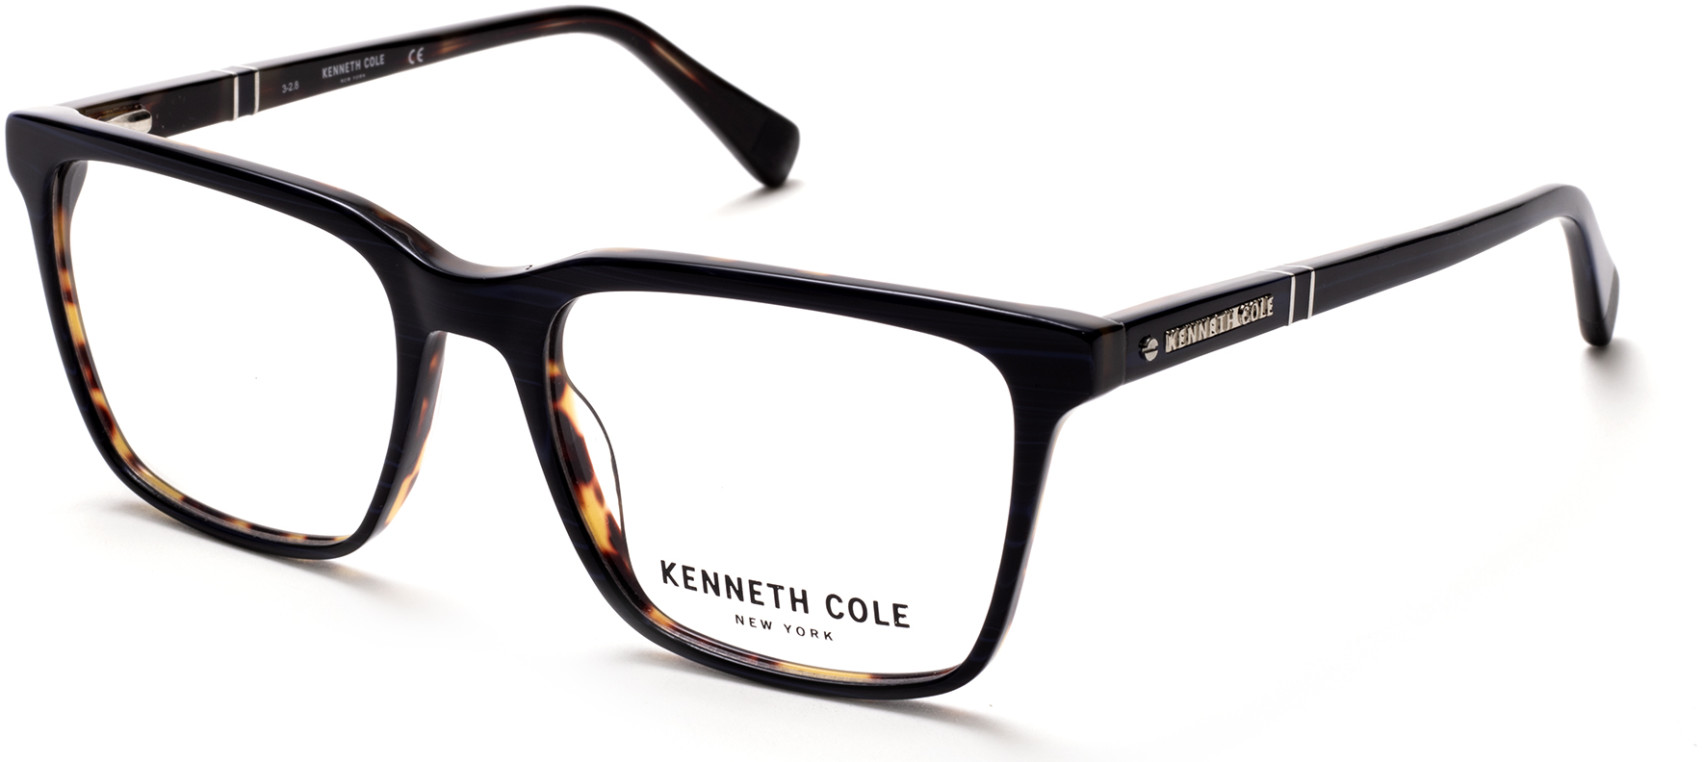 KENNETH COLE NY 0290 092